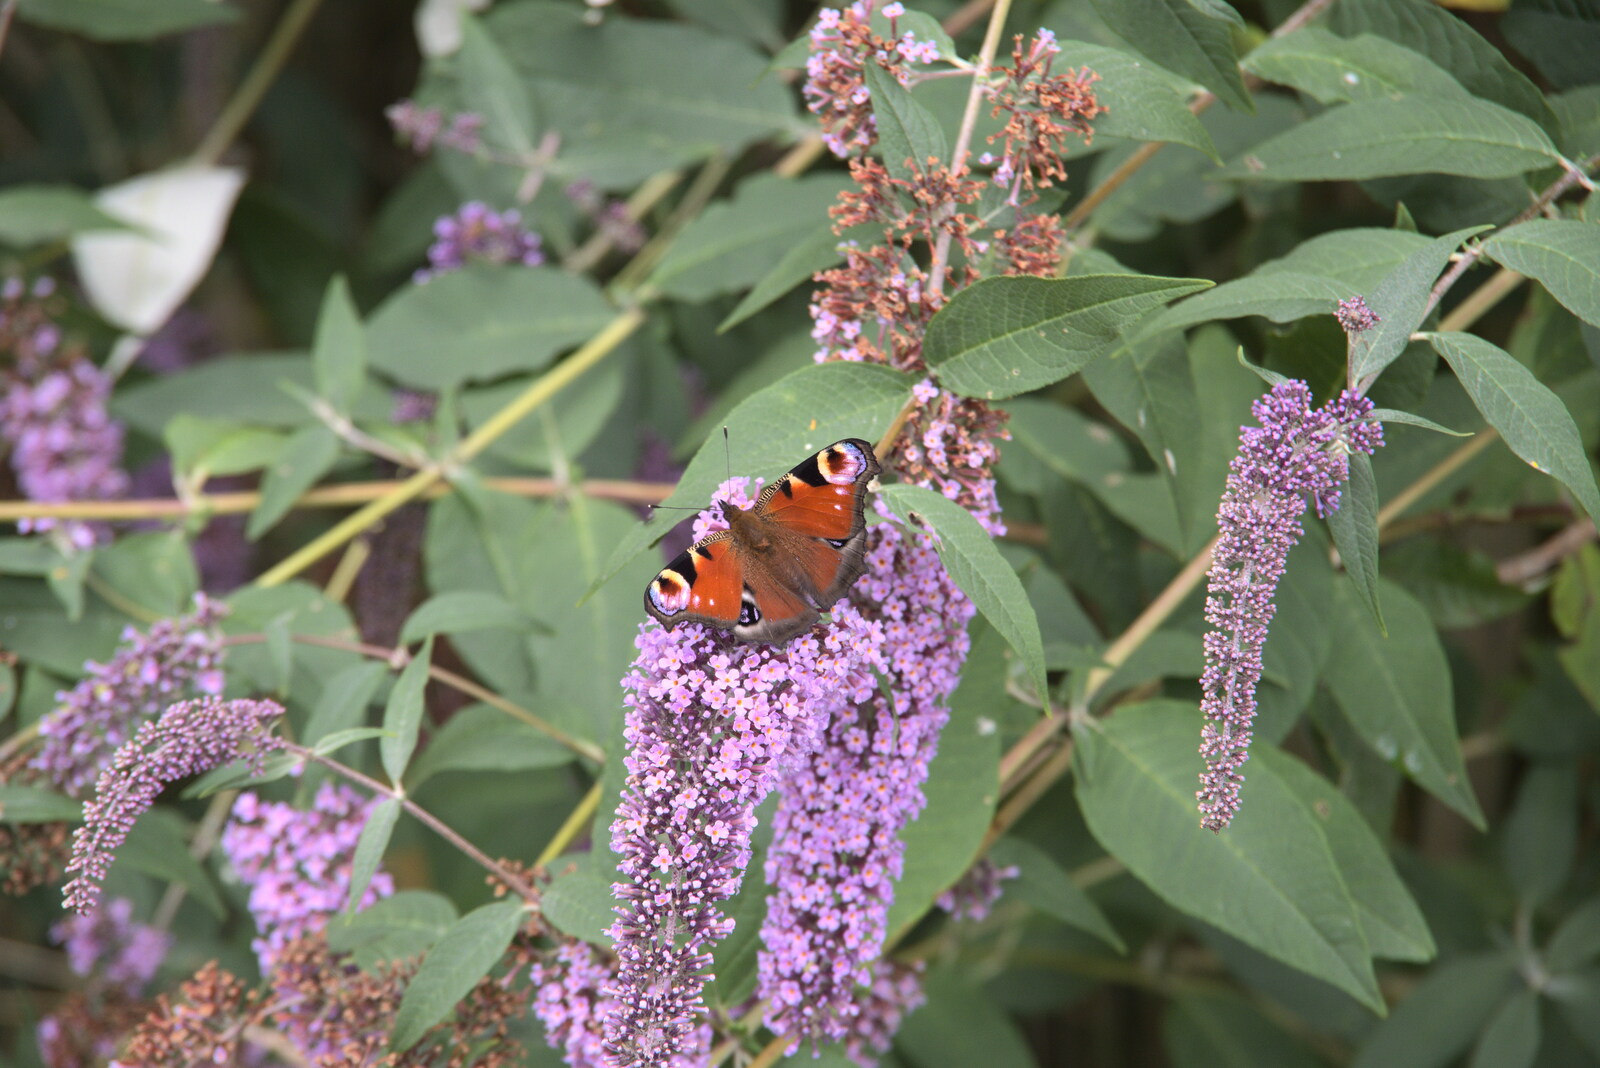 A peacock butterfly on buddleia from Meg-fest, and Sean Visits, Bressingham and Brome, Suffolk - 1st August 2021